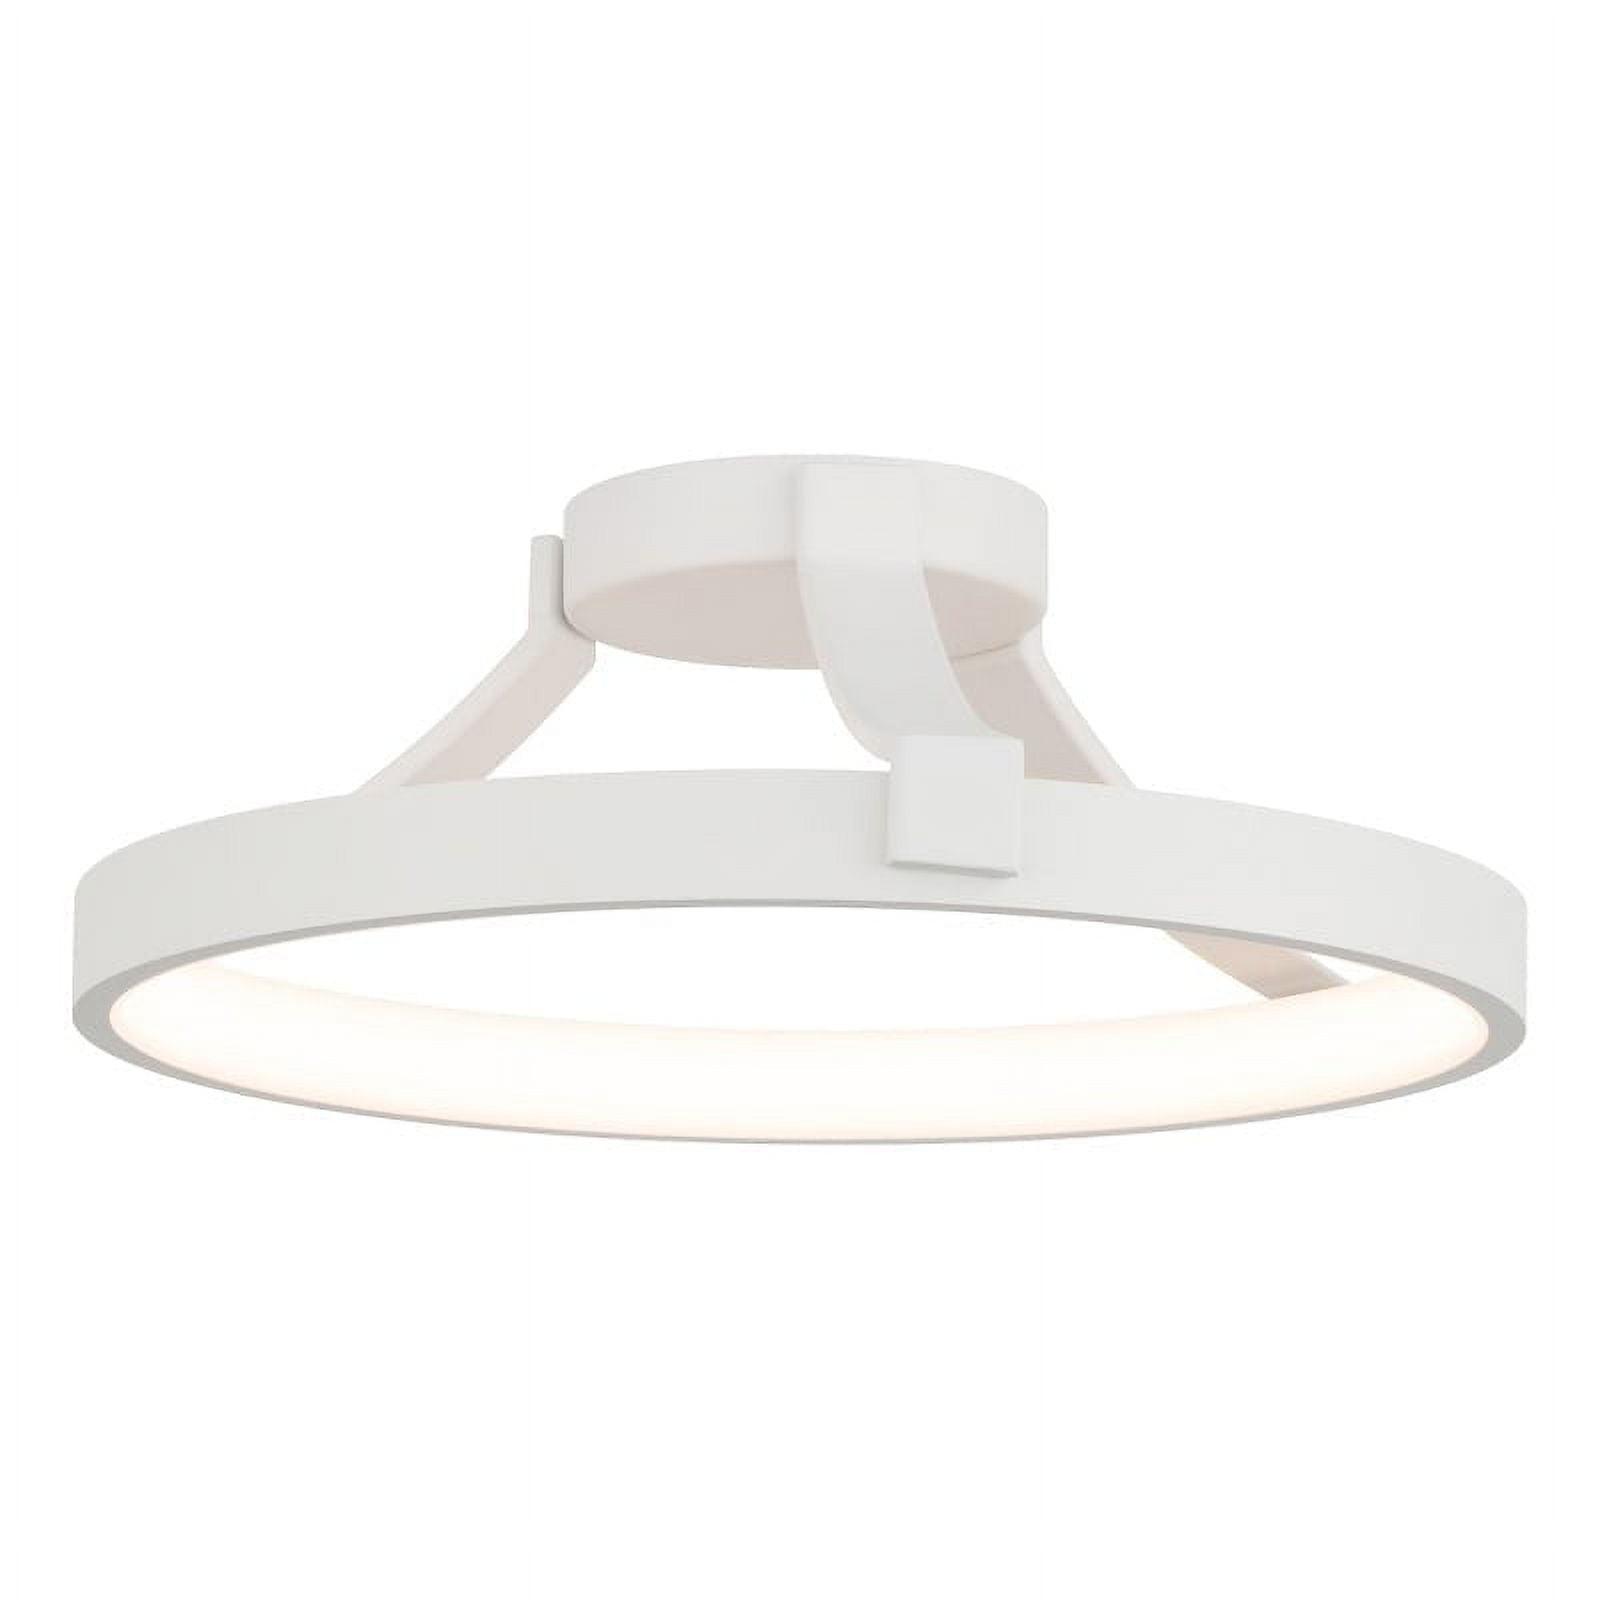 Chaucer 16" White Aluminum LED Semi-Flush Mount with Dimming